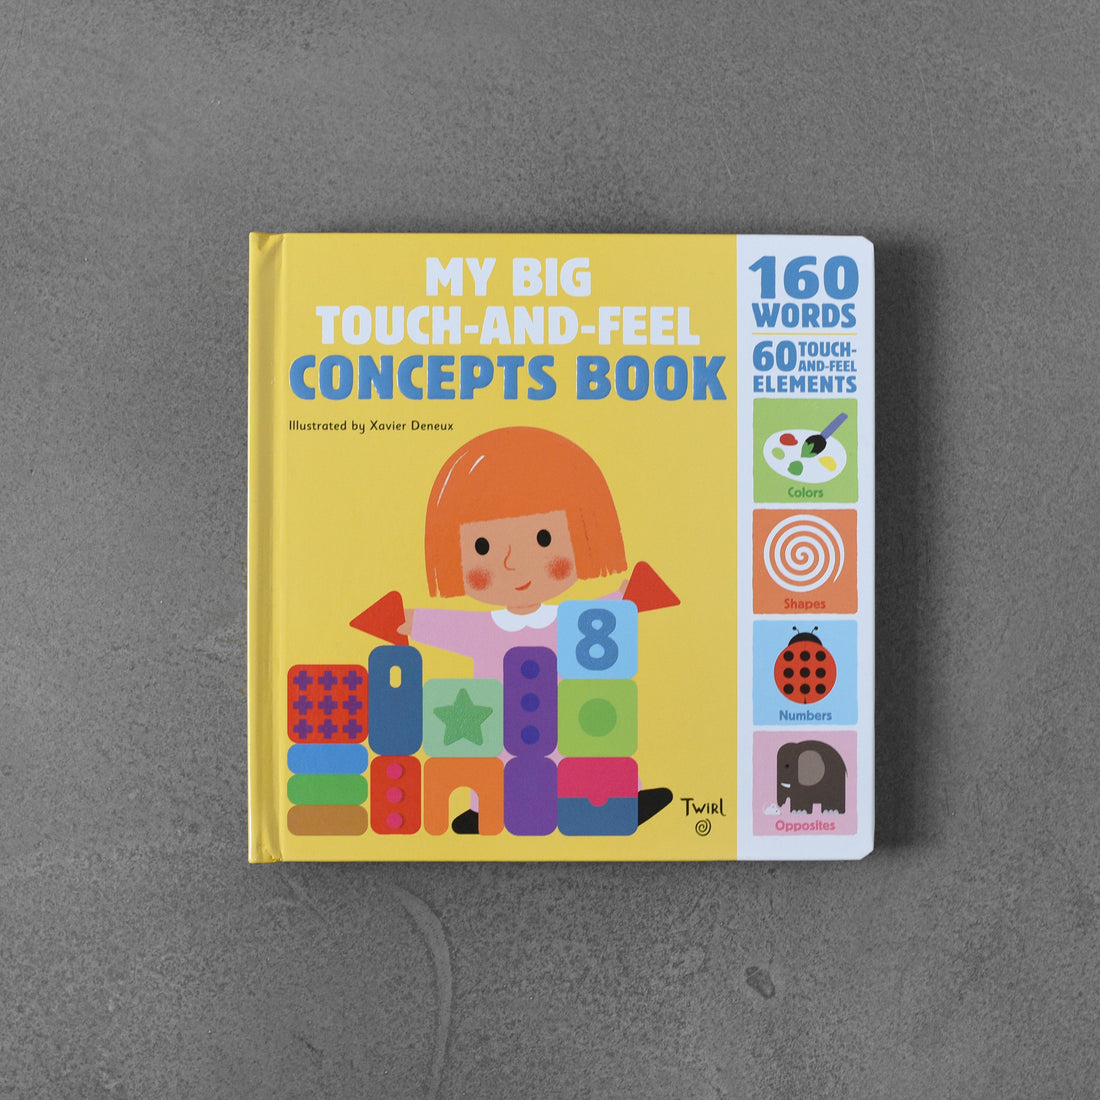 My Big Touch-and-Feel Concepts Book